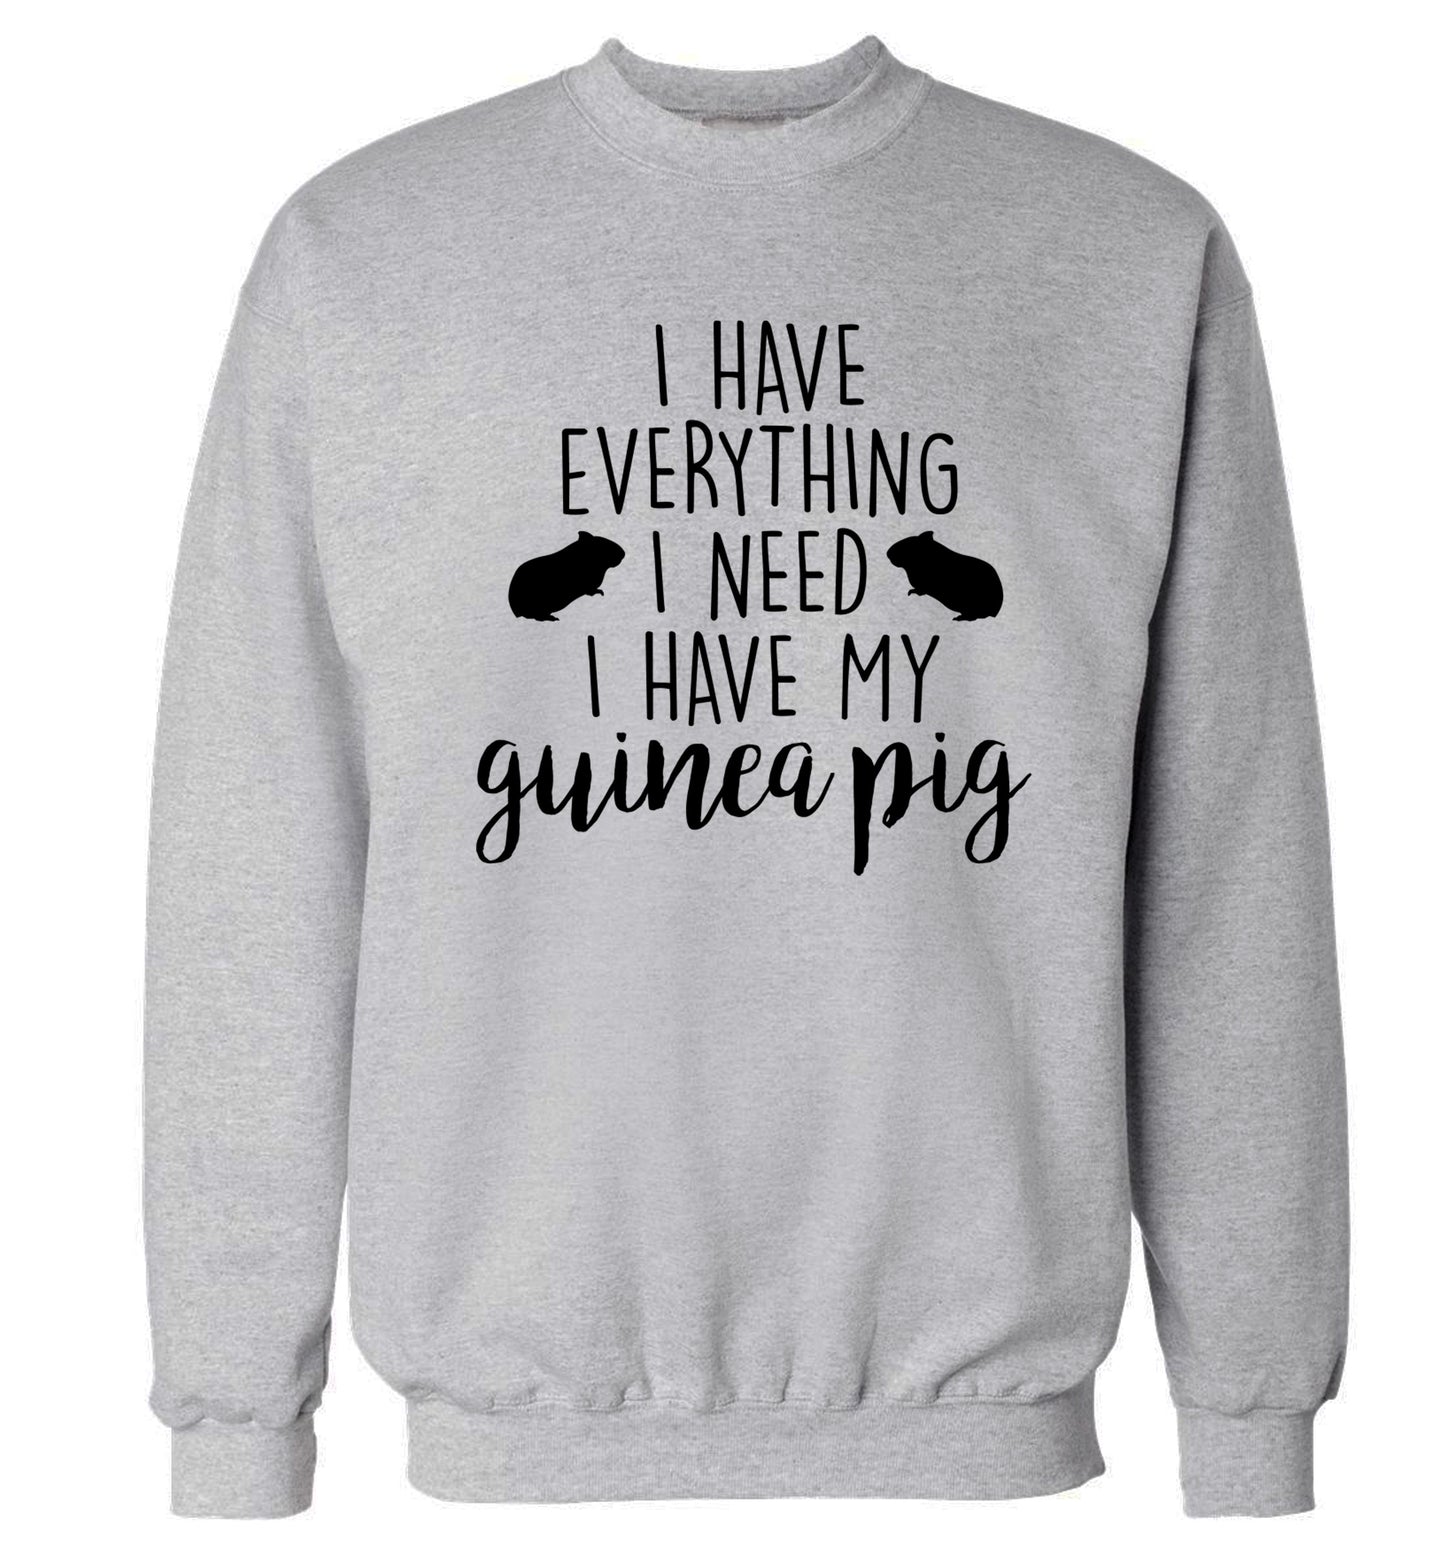 I have everything I need, I have my guinea pig Adult's unisex grey  sweater 2XL